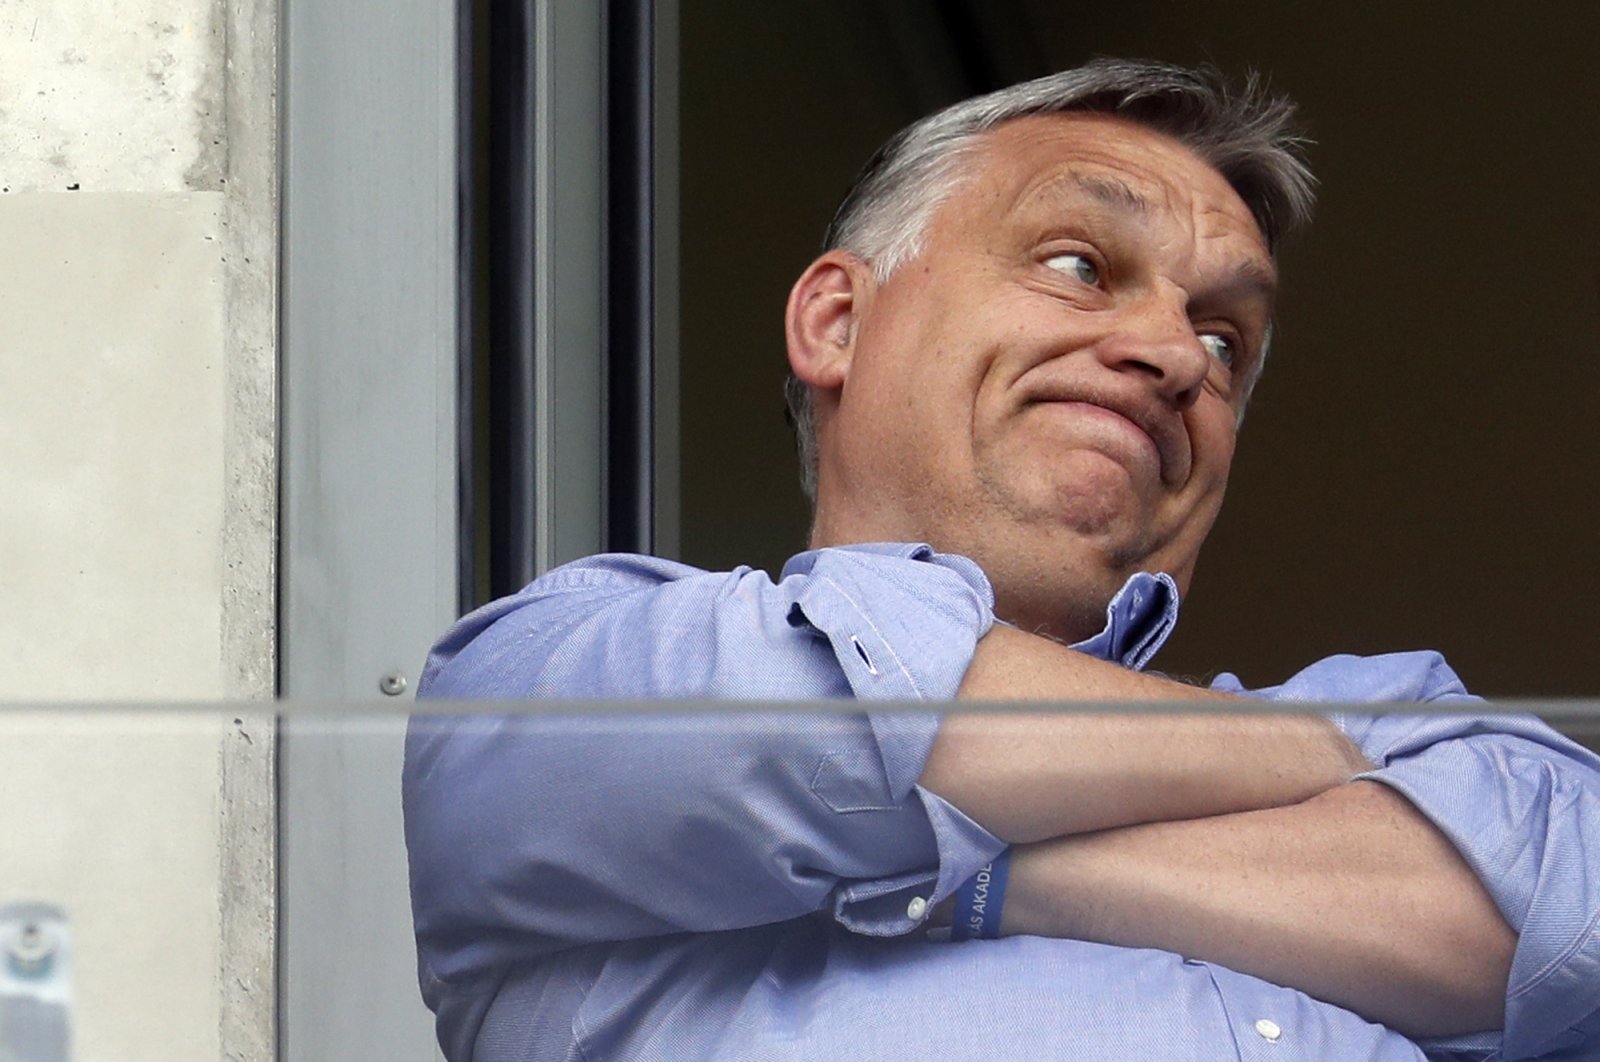 Hungarian Prime Minister Viktor Orban watches a football game in his hometown of Felcsut, Hungary, May 19, 2019. (AP Photo)